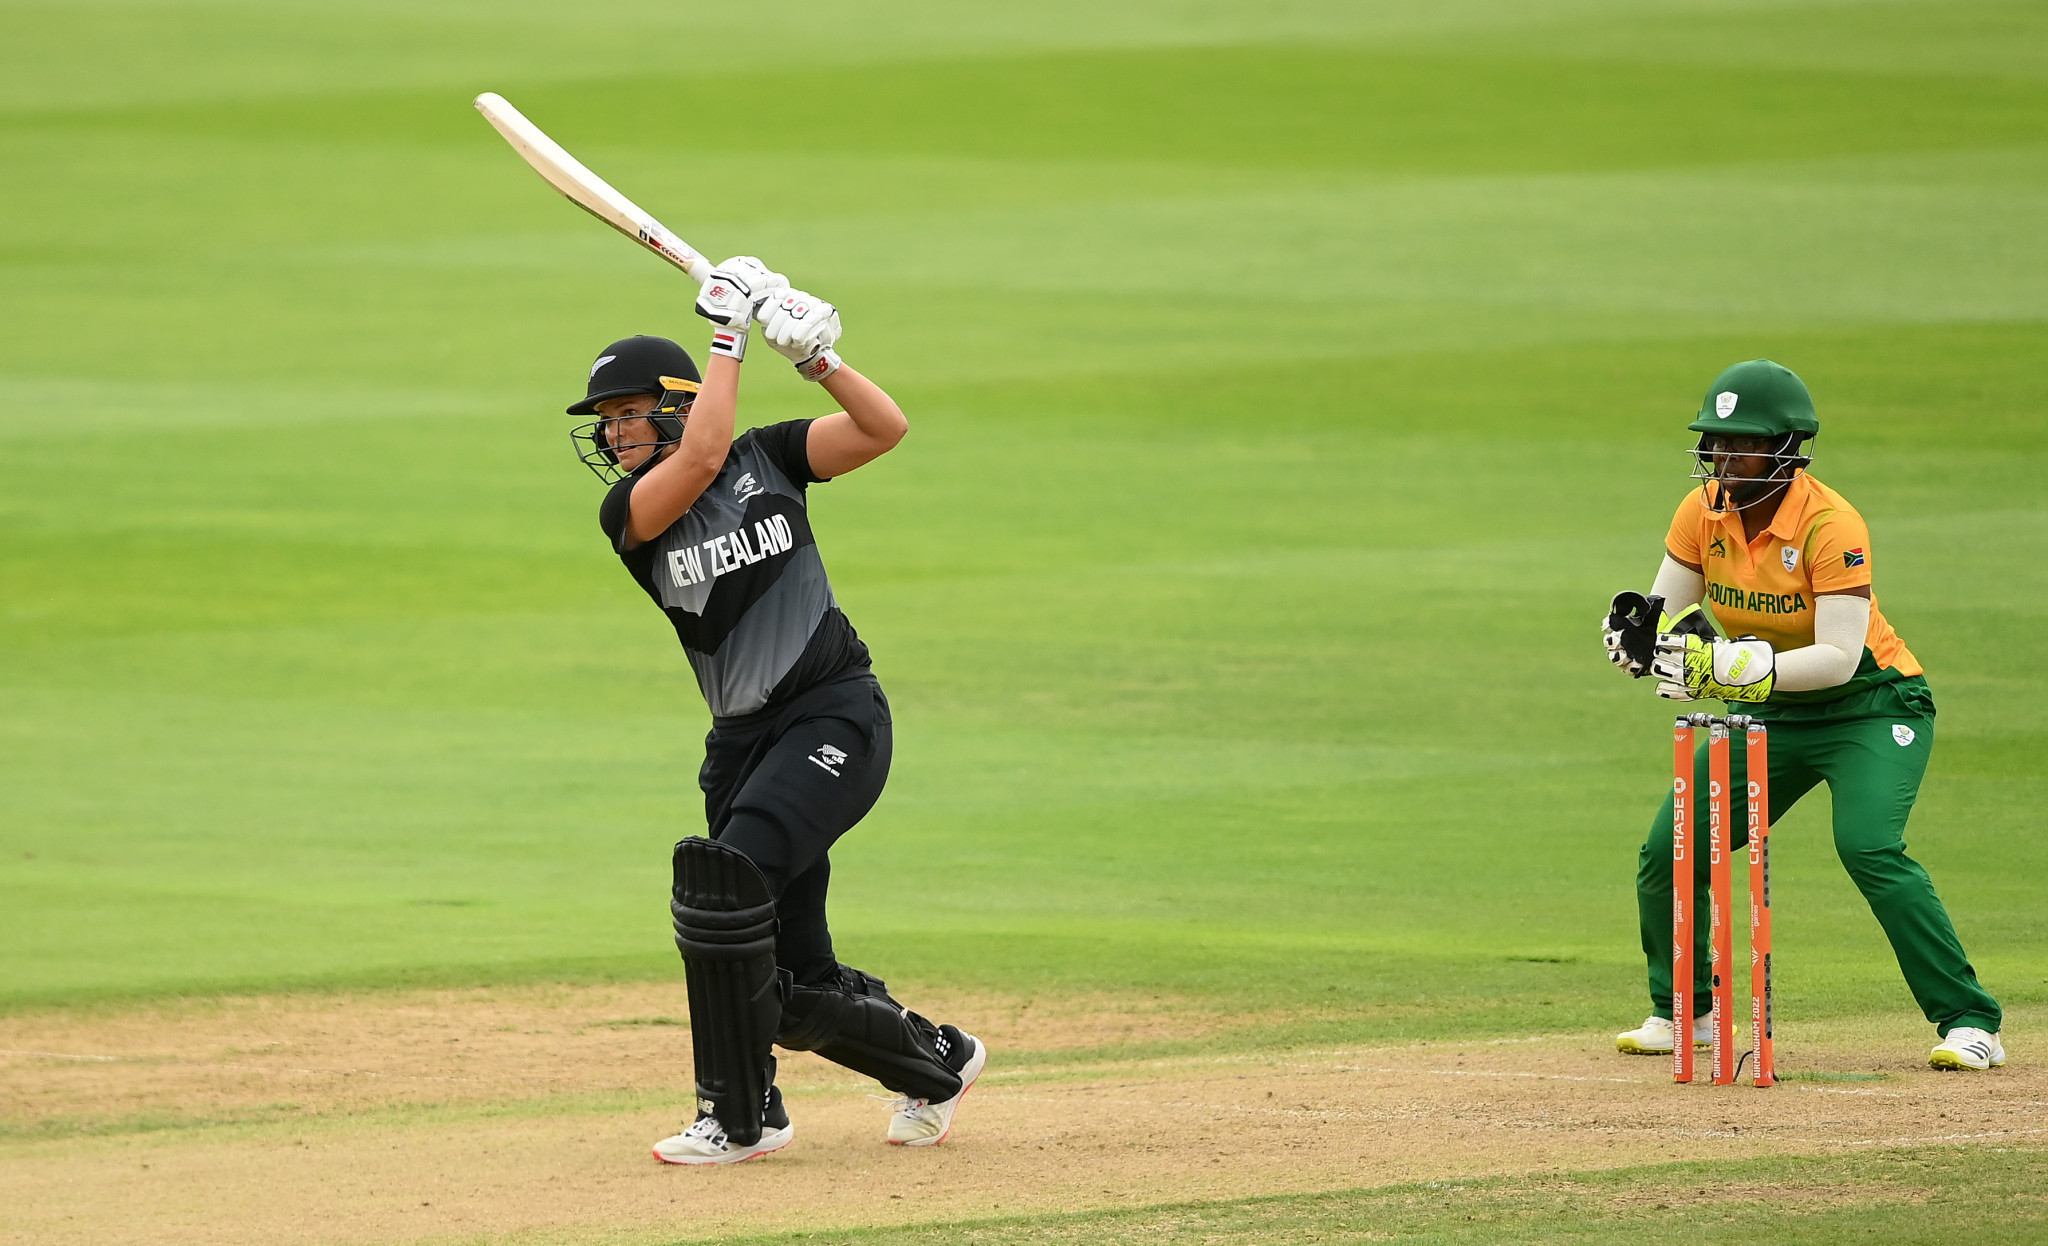 Suzie Bates scored an unbeaten 91, the highest individual score so far, in New Zealand's victory over South Africa ©Getty Images